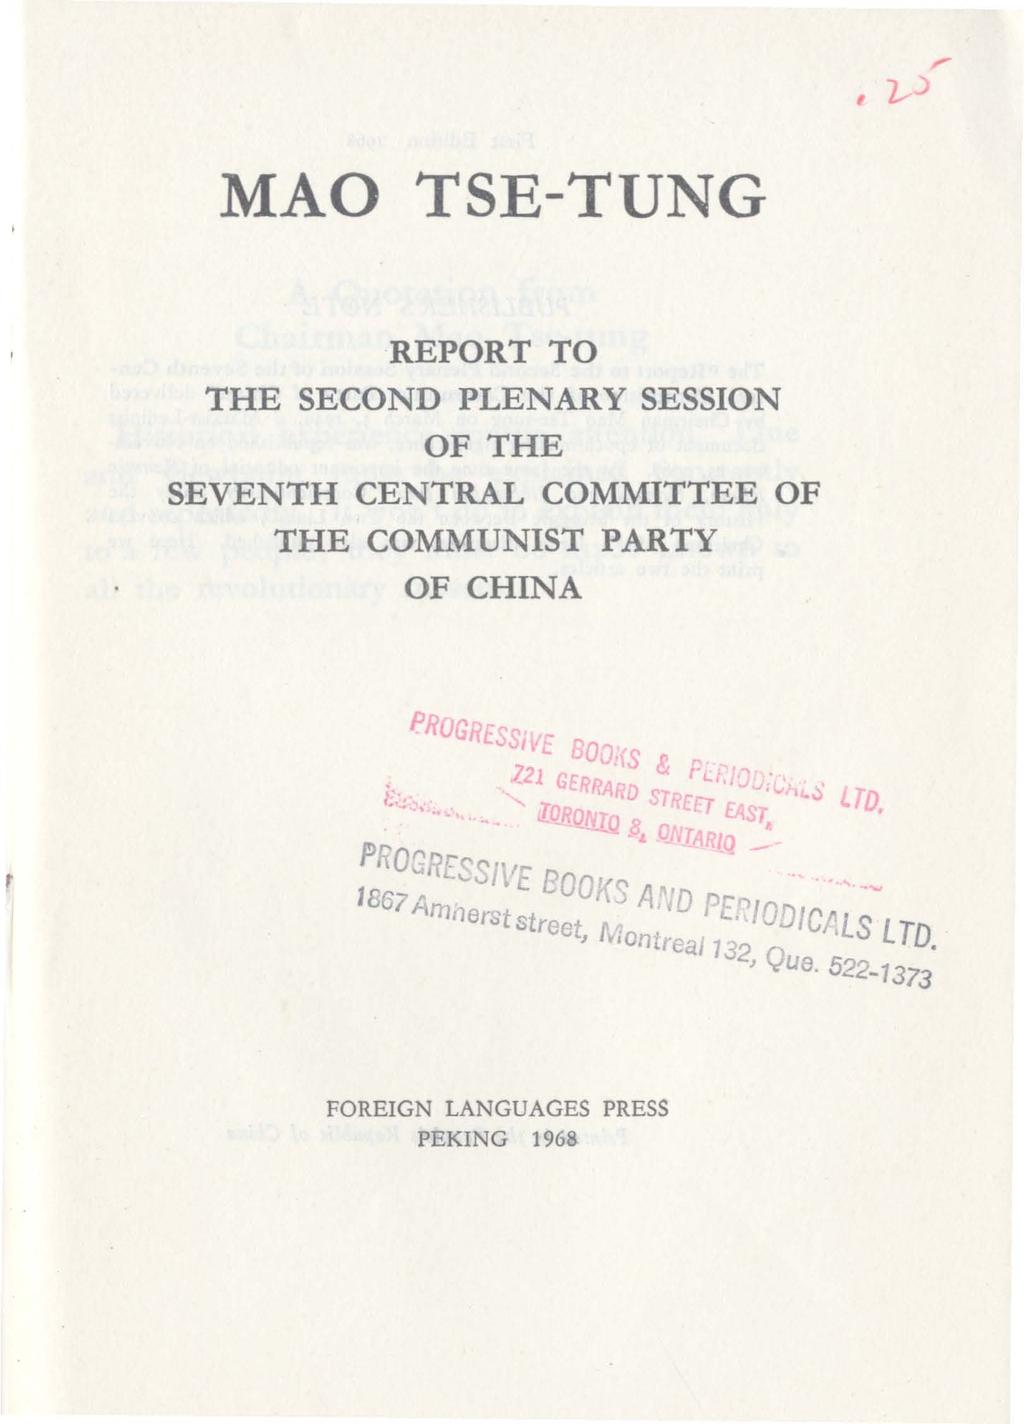 , l- J MAO TSE-TUNG REPORT TO THE SECOND PLENARY SESSION OF THE SEVENTH CENTRAL